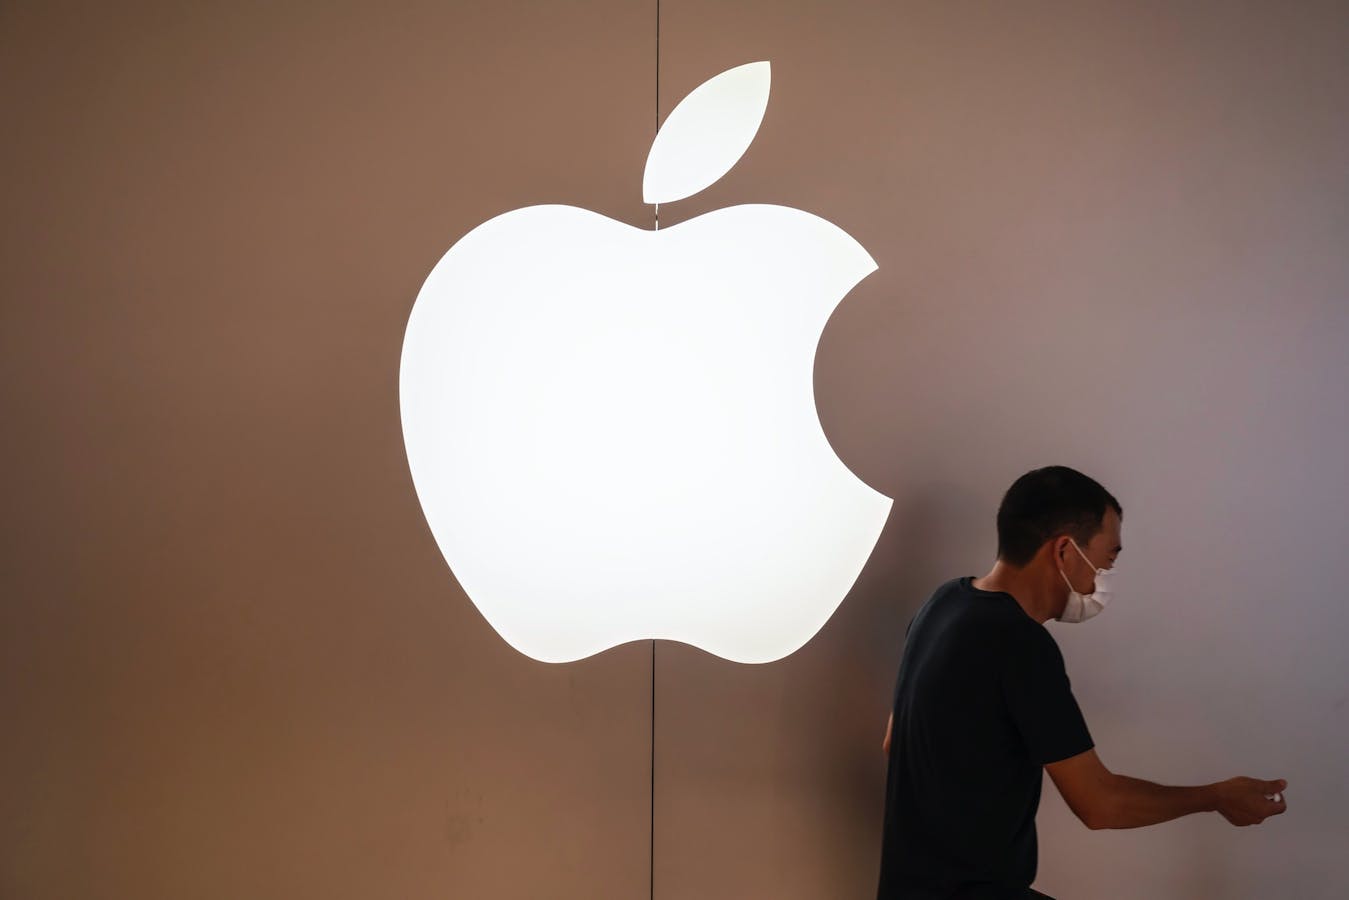 A pedestrian walks past an Apple retail store in Shenzhen. In recent months, Apple has resumed sending some U.S. employees to China to meet with its manufacturing partners. Photo: Associated Press